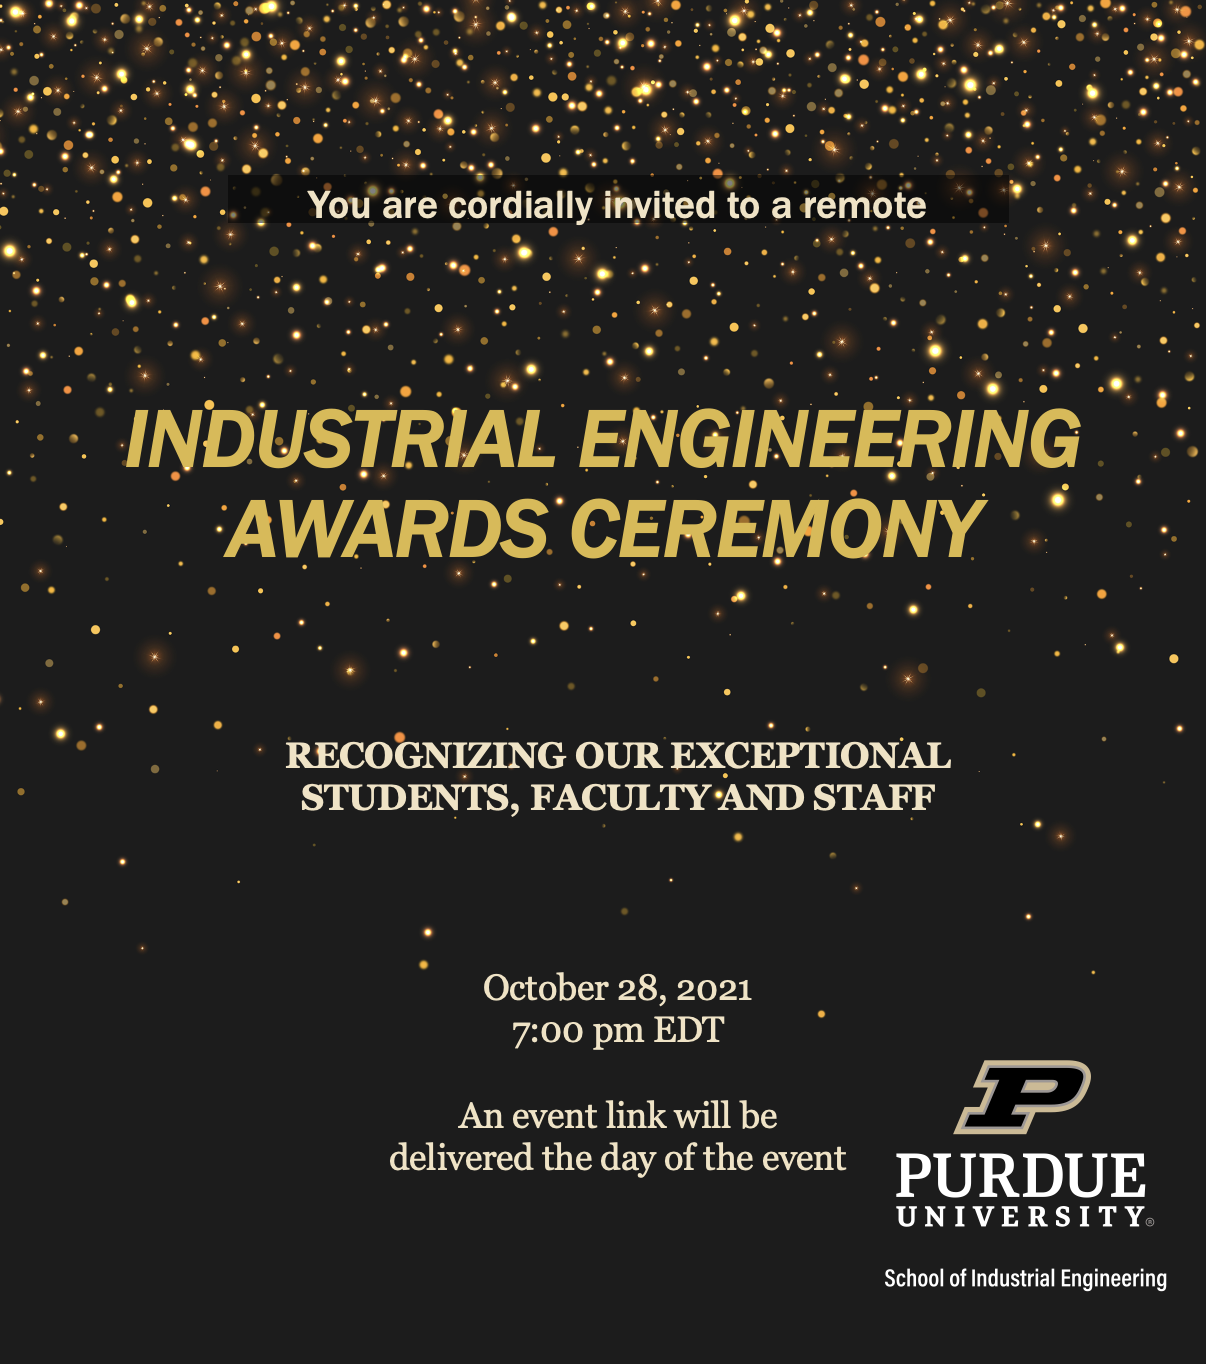 Text over black background with gold glitter - "You and your loved ones are cordially invited to a remote Industrial Engineering Awards Ceremony recognizing our exceptional students, faculty and staff. October 28, 2021; 7:00 PM EDT; An event link will de delivered the day of the event."